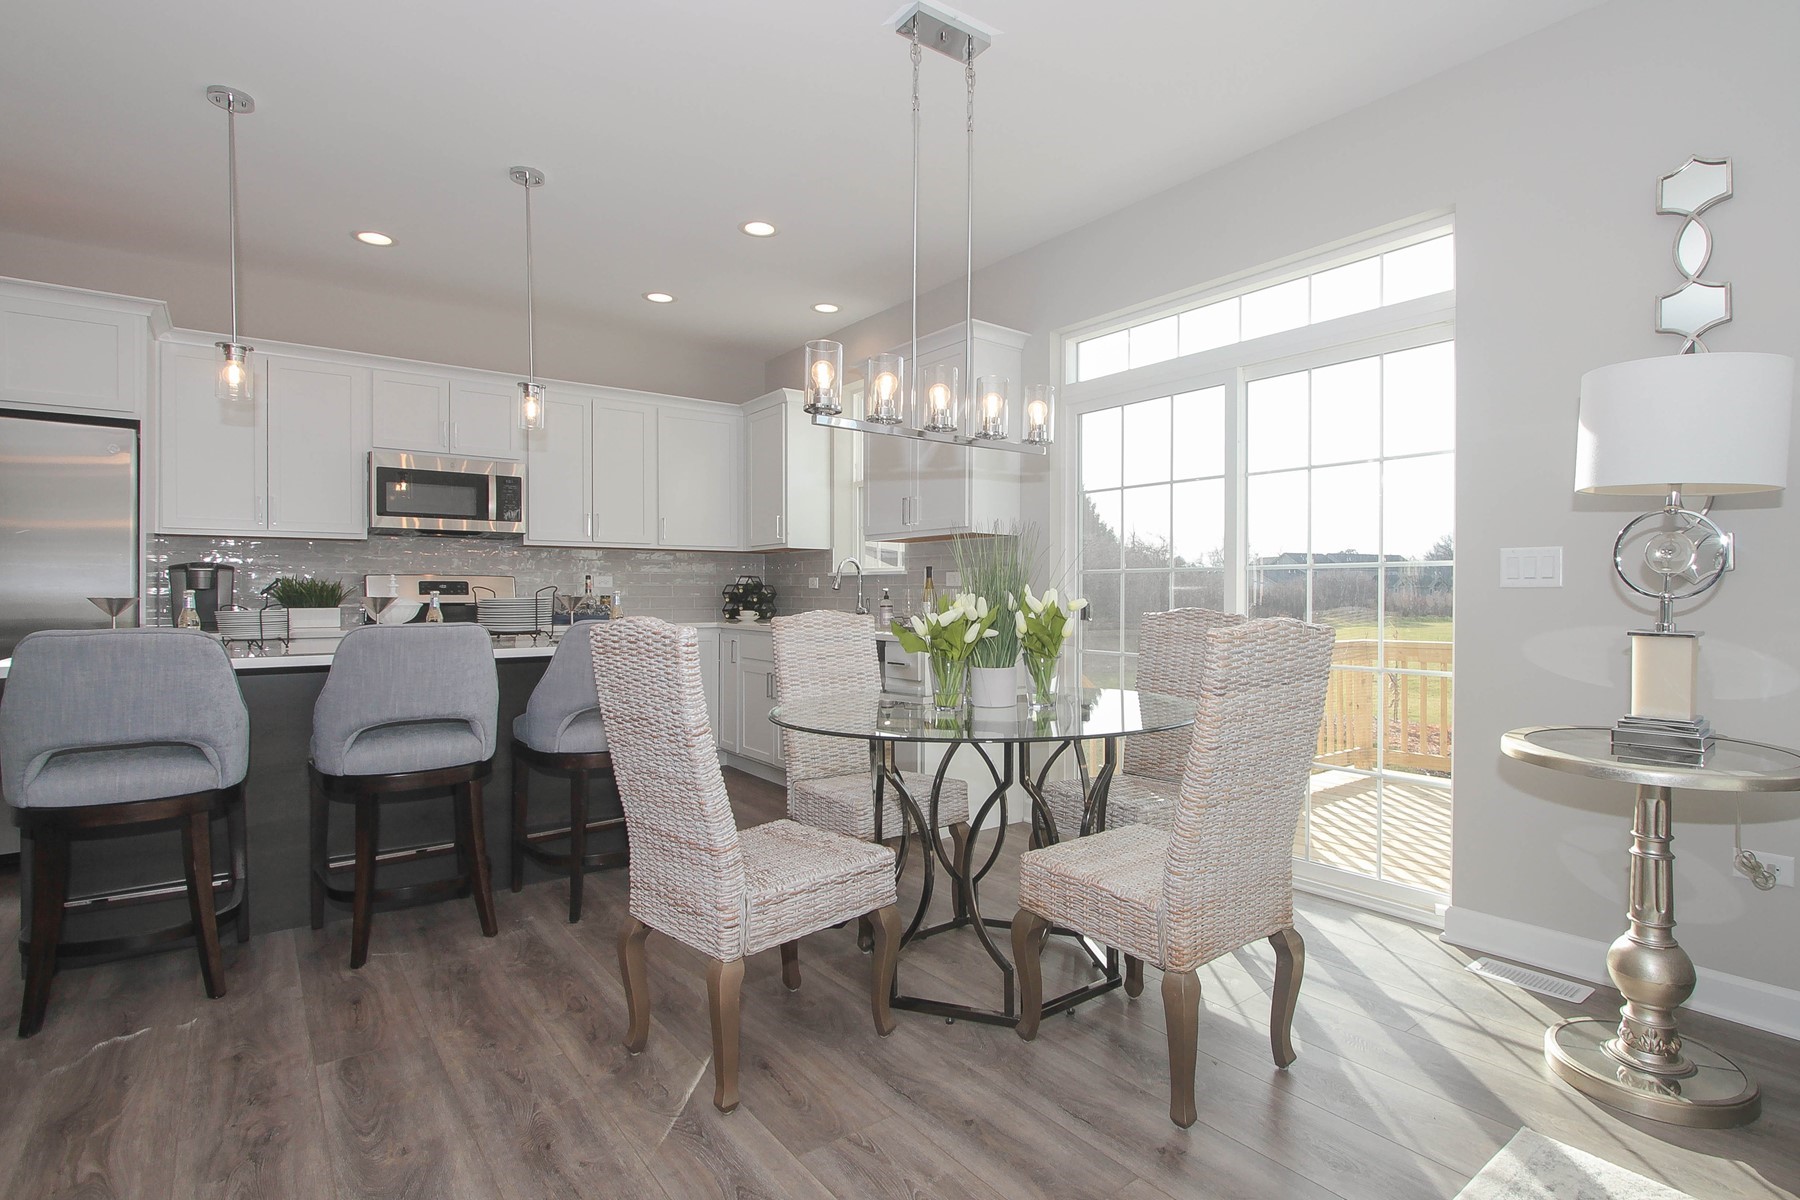 In the Geneva model, casual dining can be enjoyed in the dinette, at the breakfast bar or on the deck.